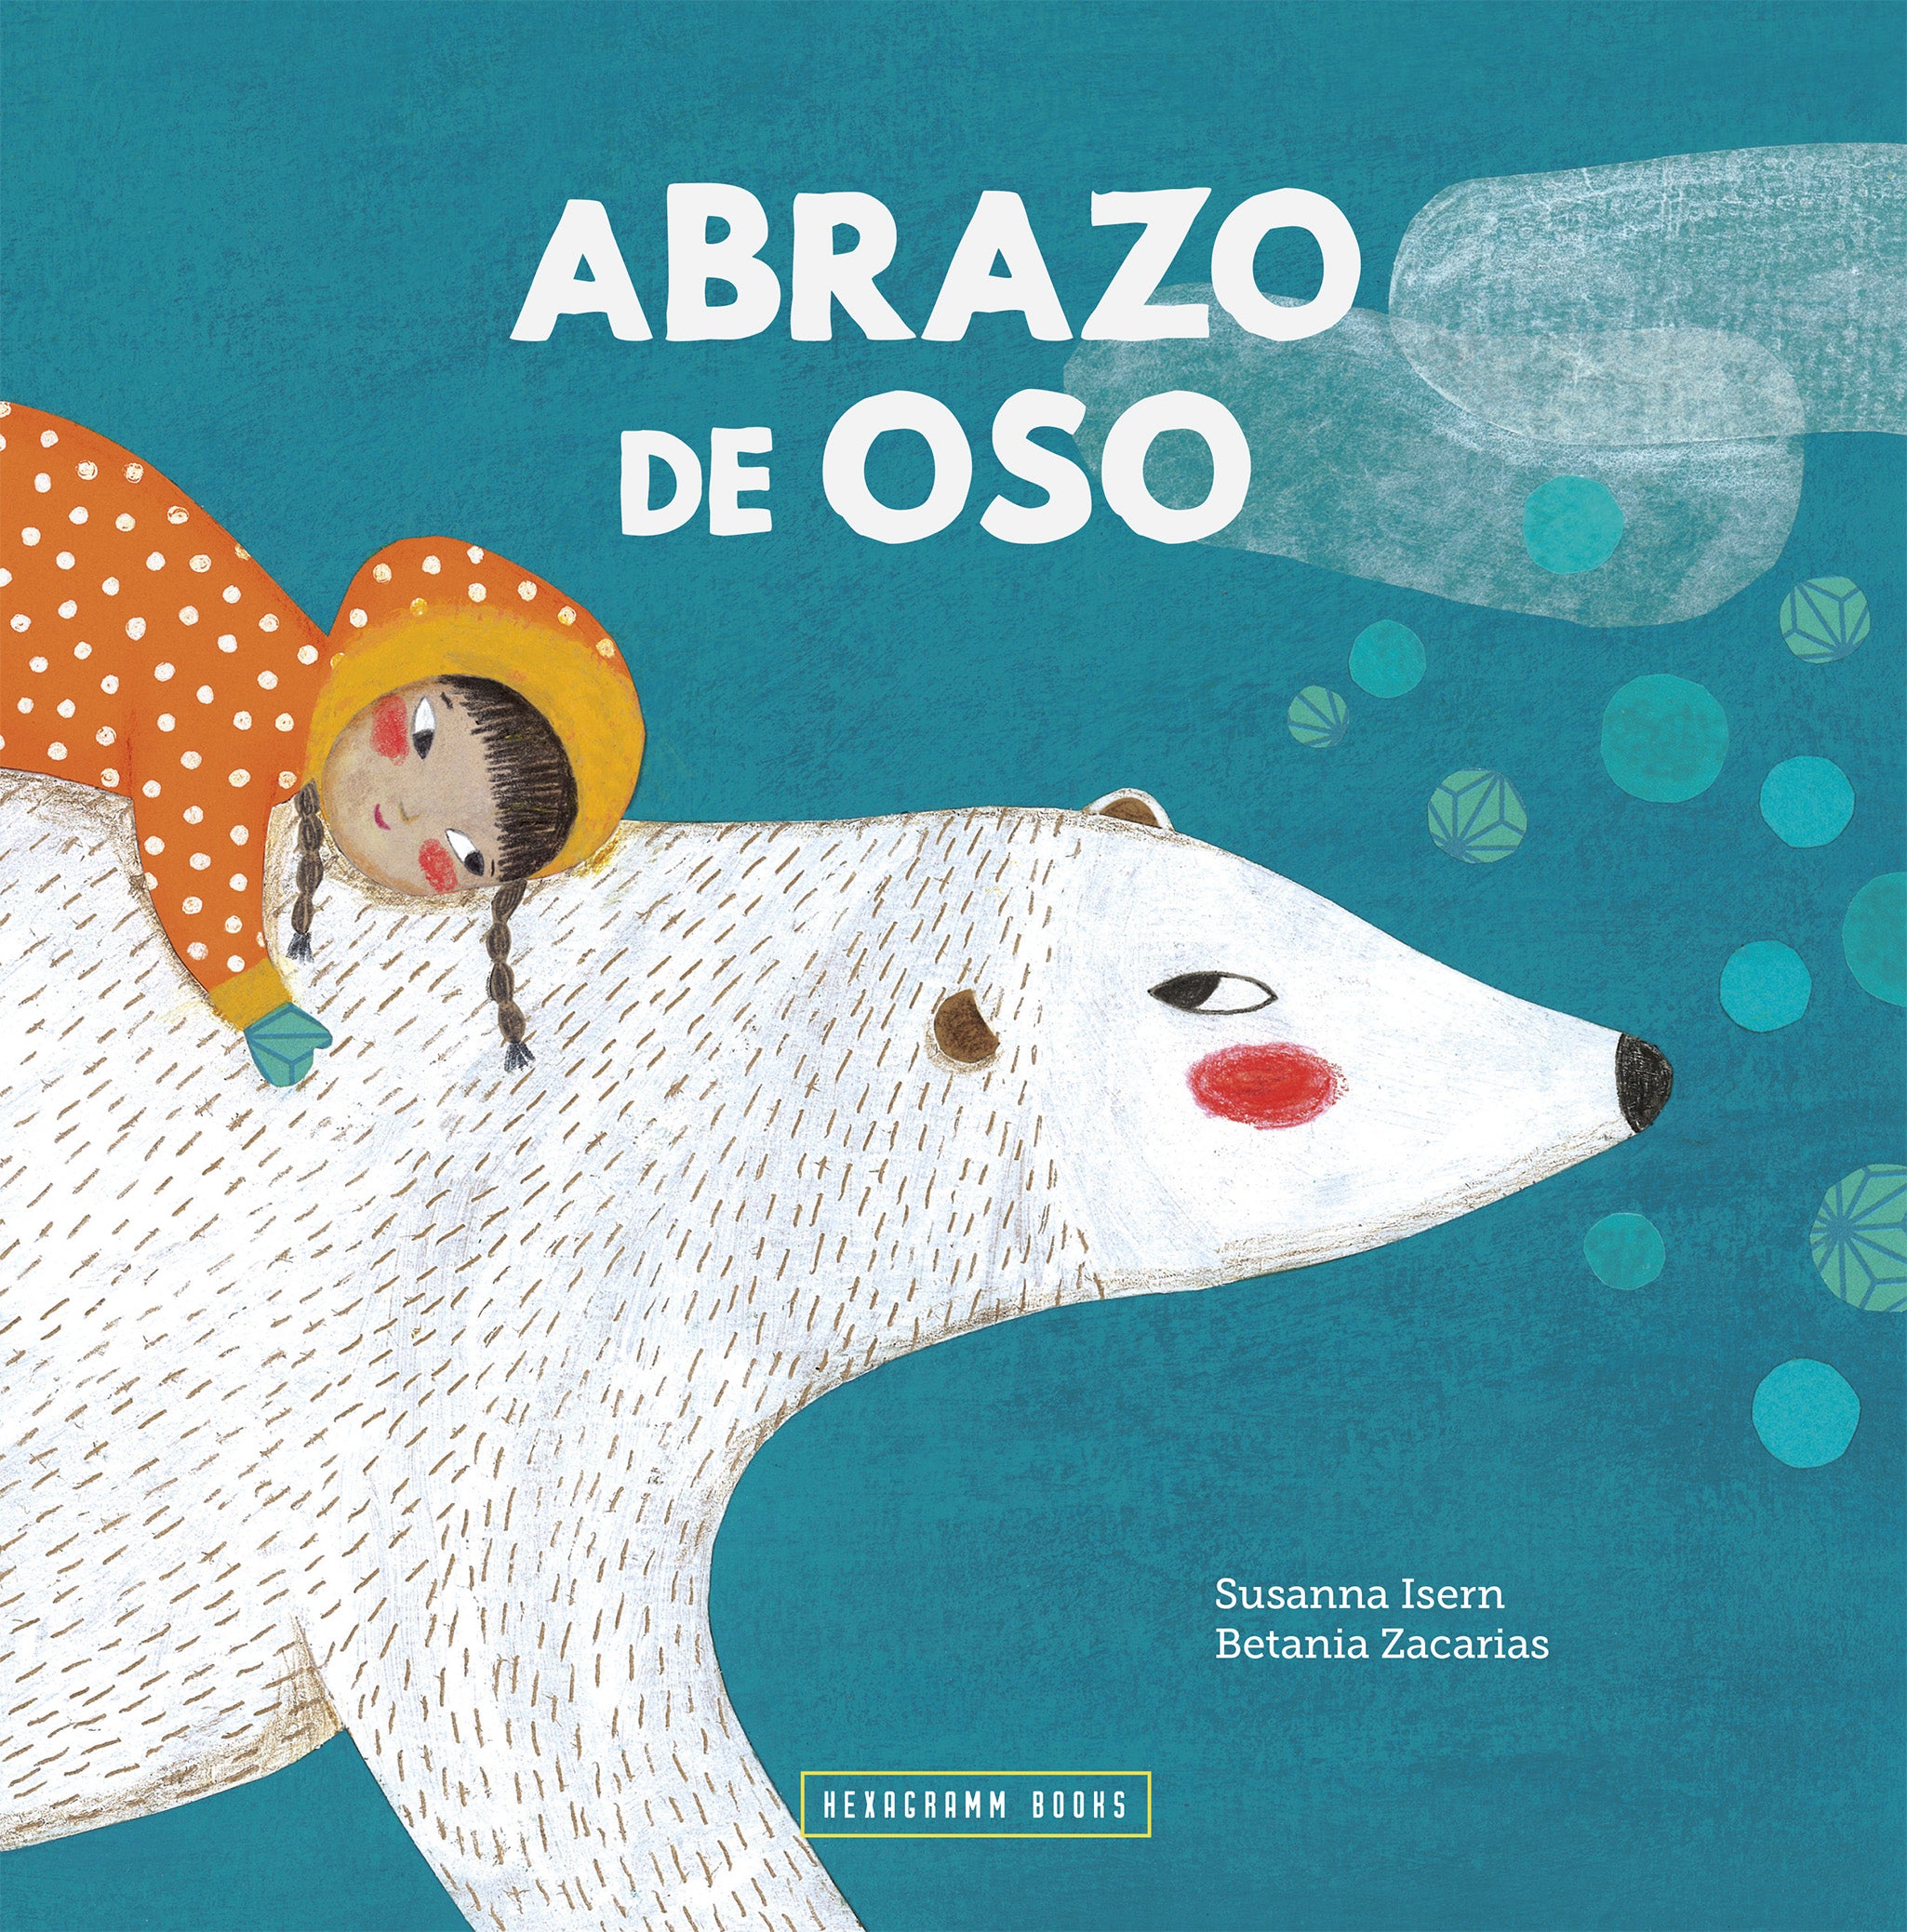 Abrazo de oso (paperback) - Guided Reading Set of 6